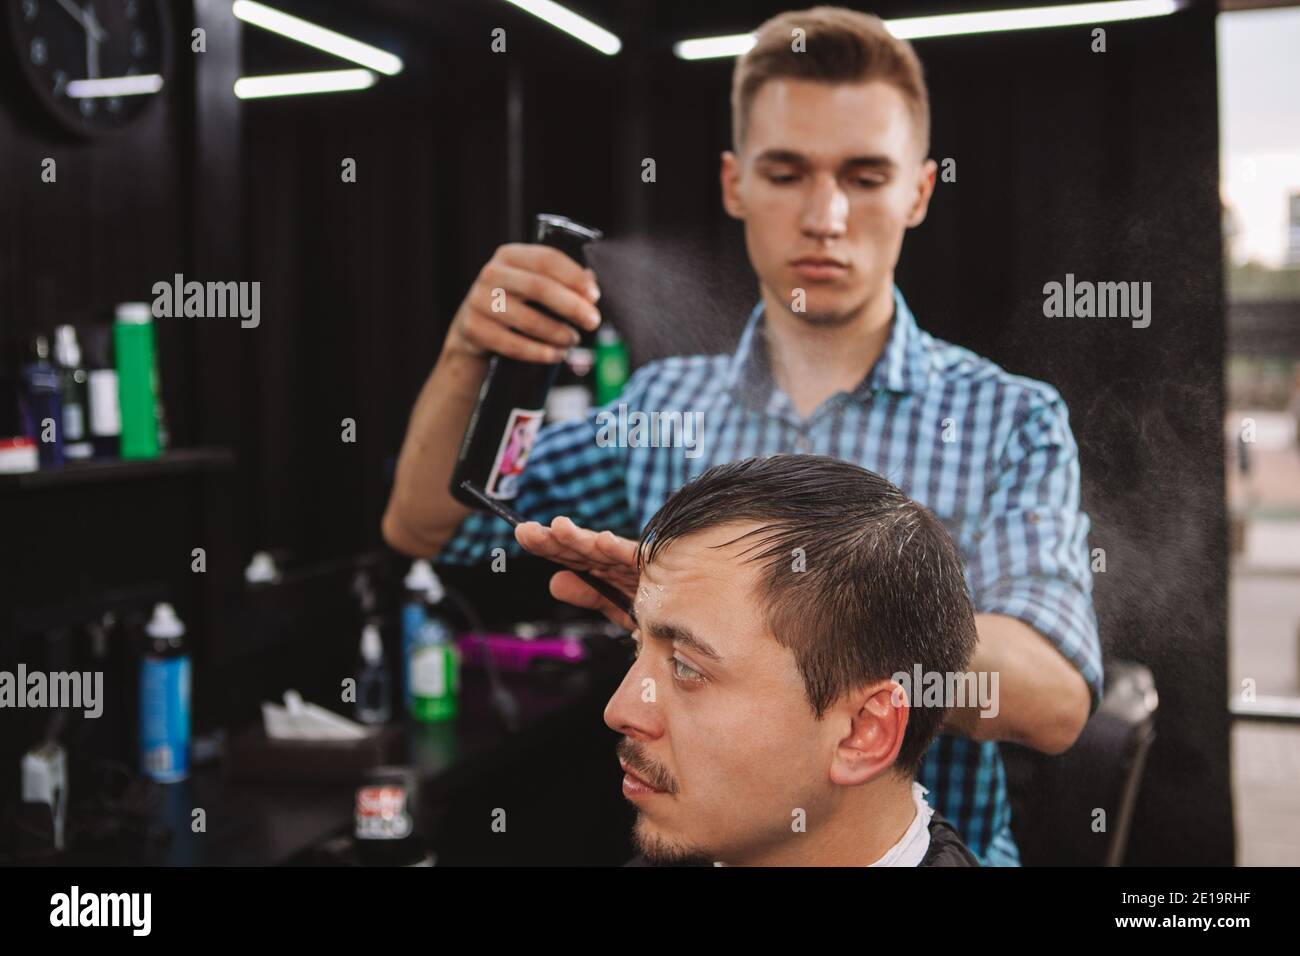 Mature man getting his hair wet by professional barber. Hairstylist spraying hair of a male client with water, copy space. Haircut, hair styling conce Stock Photo